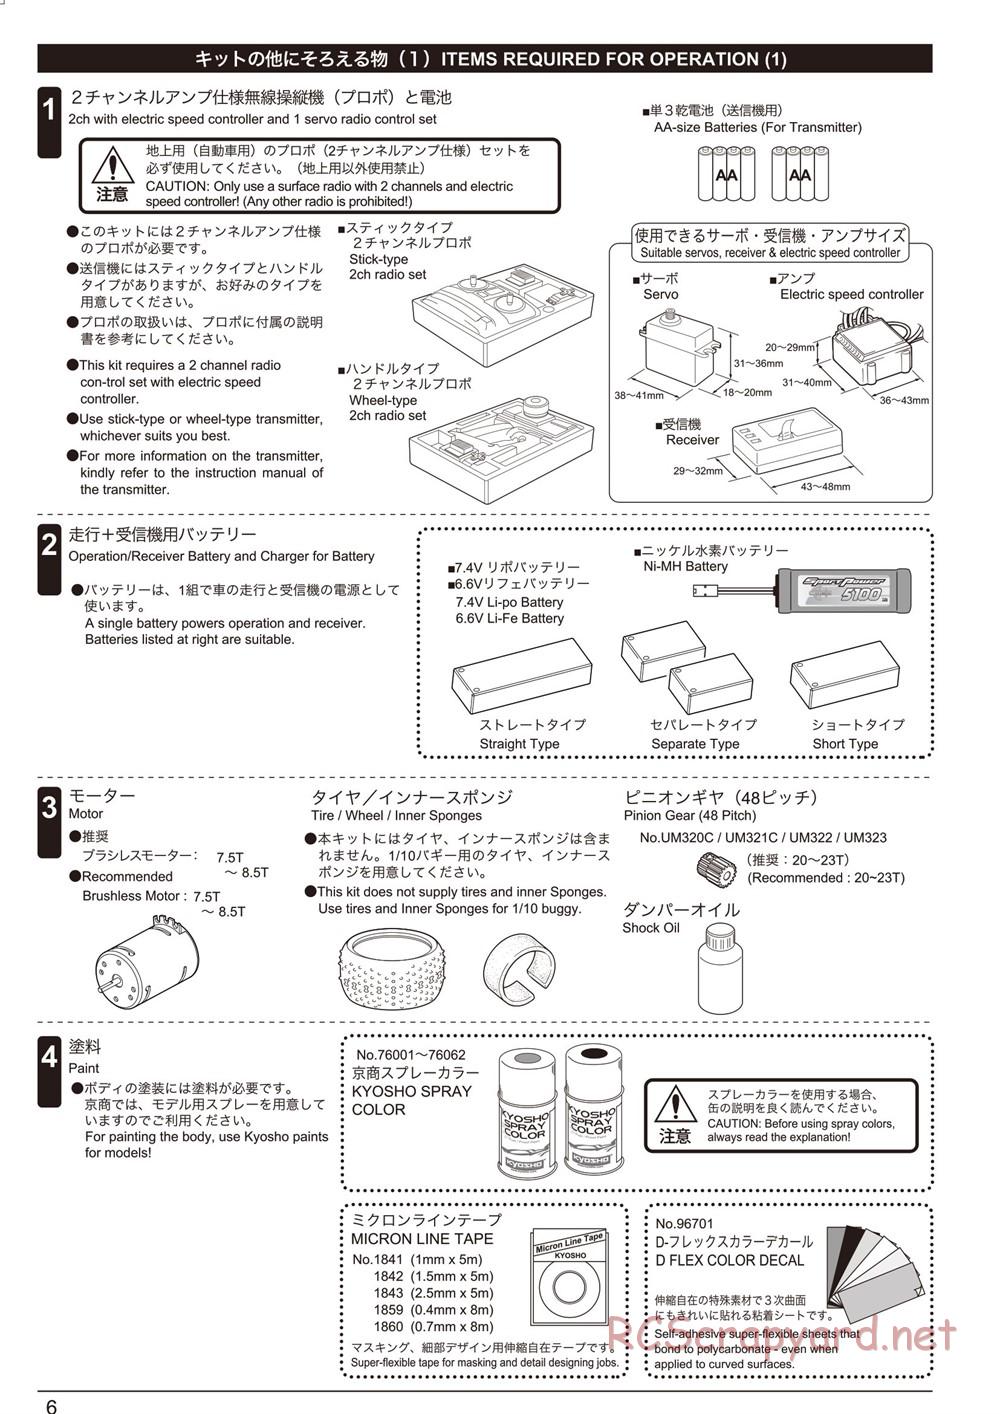 Kyosho - Ultima RB6 (2015) - Manual - Page 6